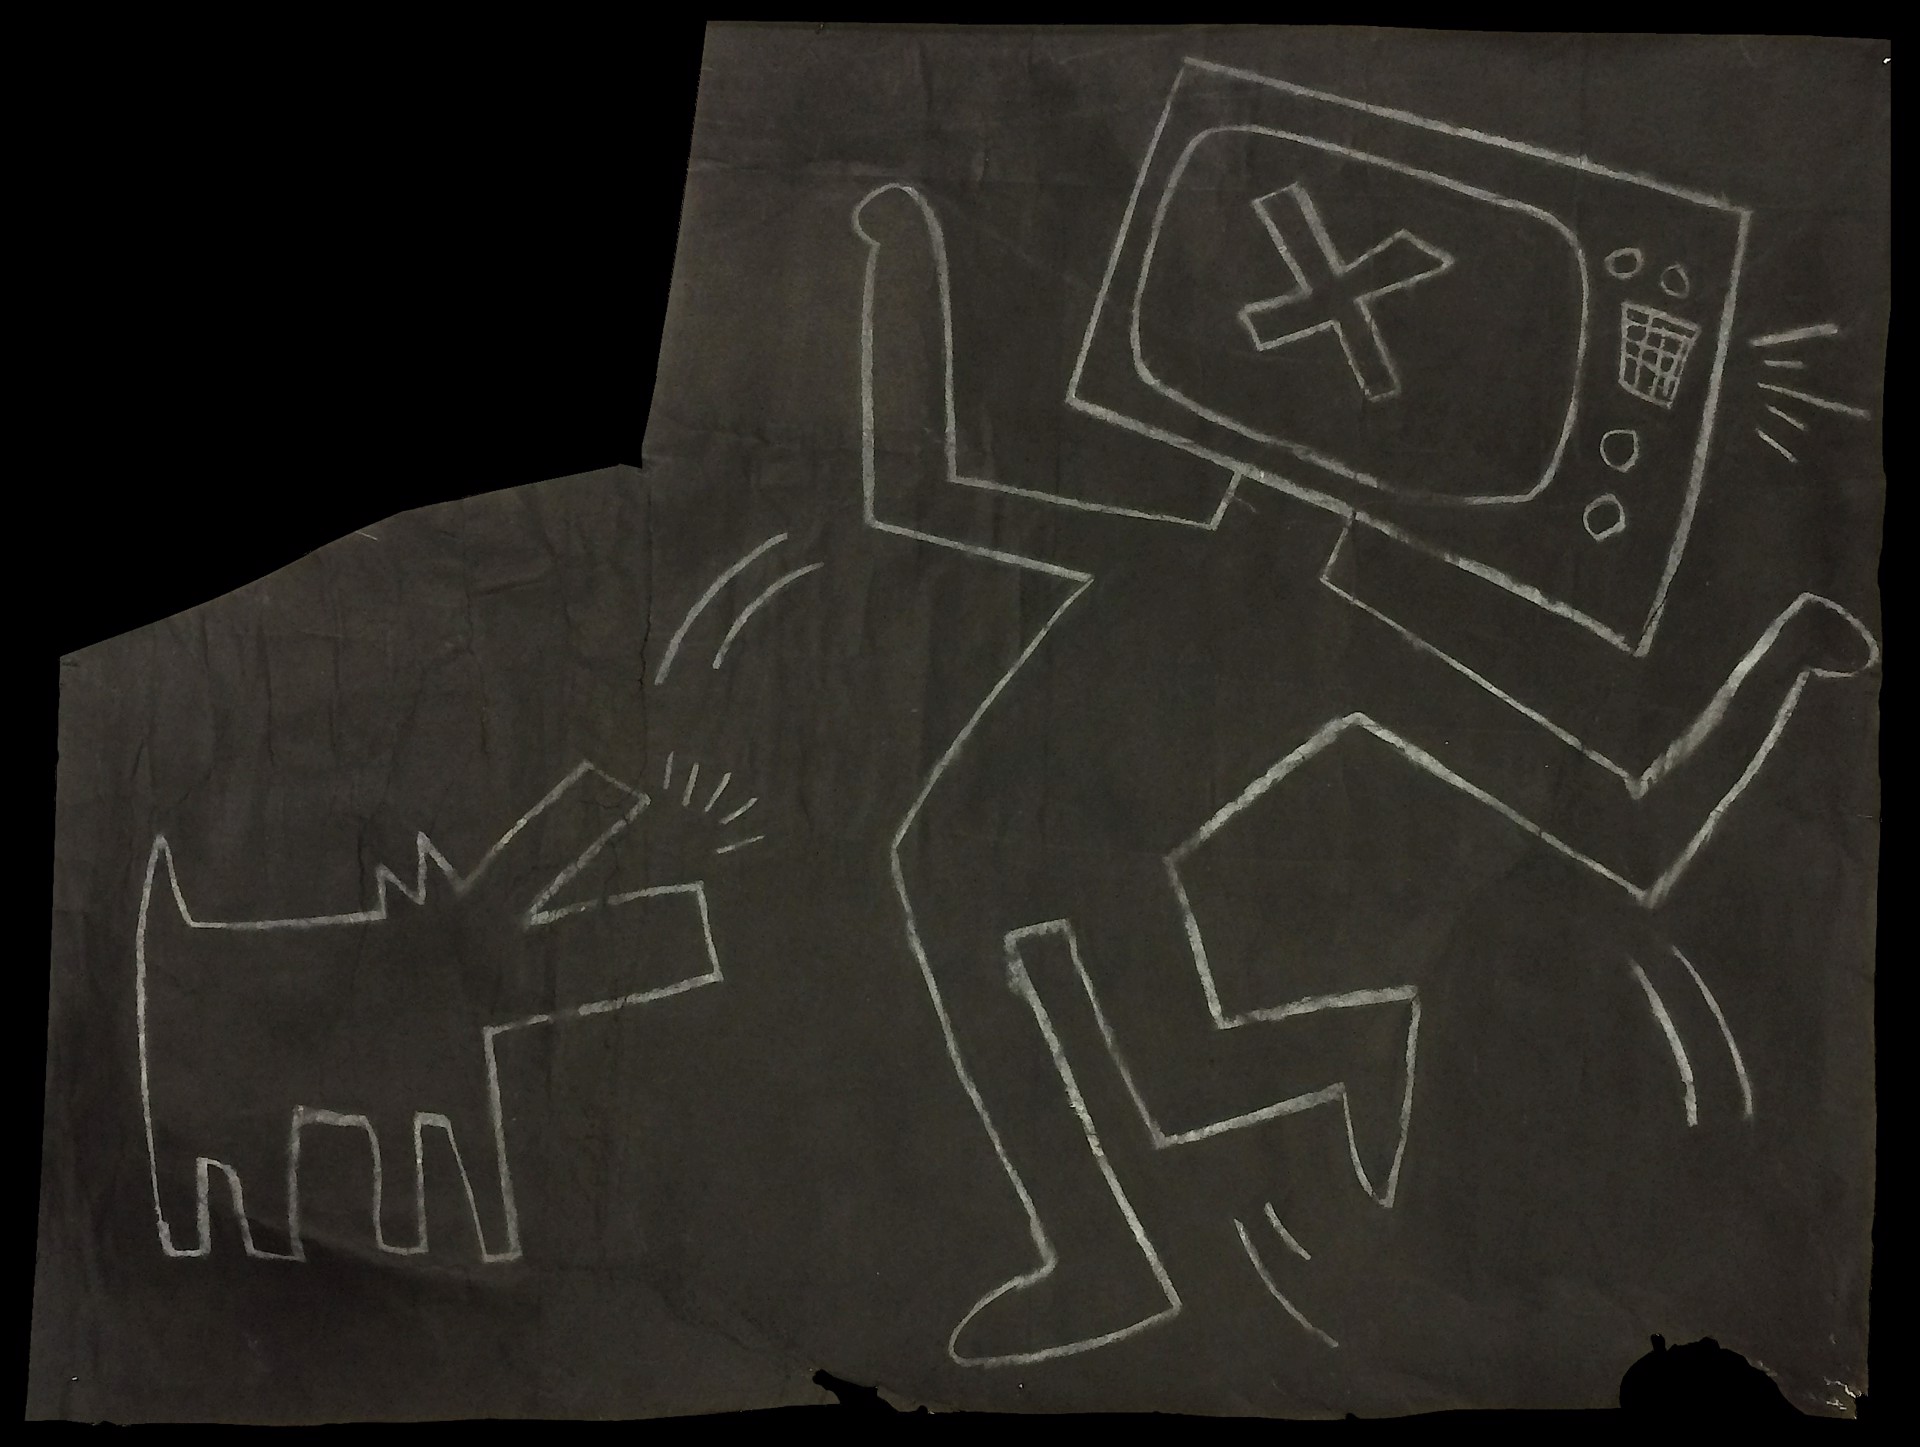 TV Man with Barking Dog by Keith Haring